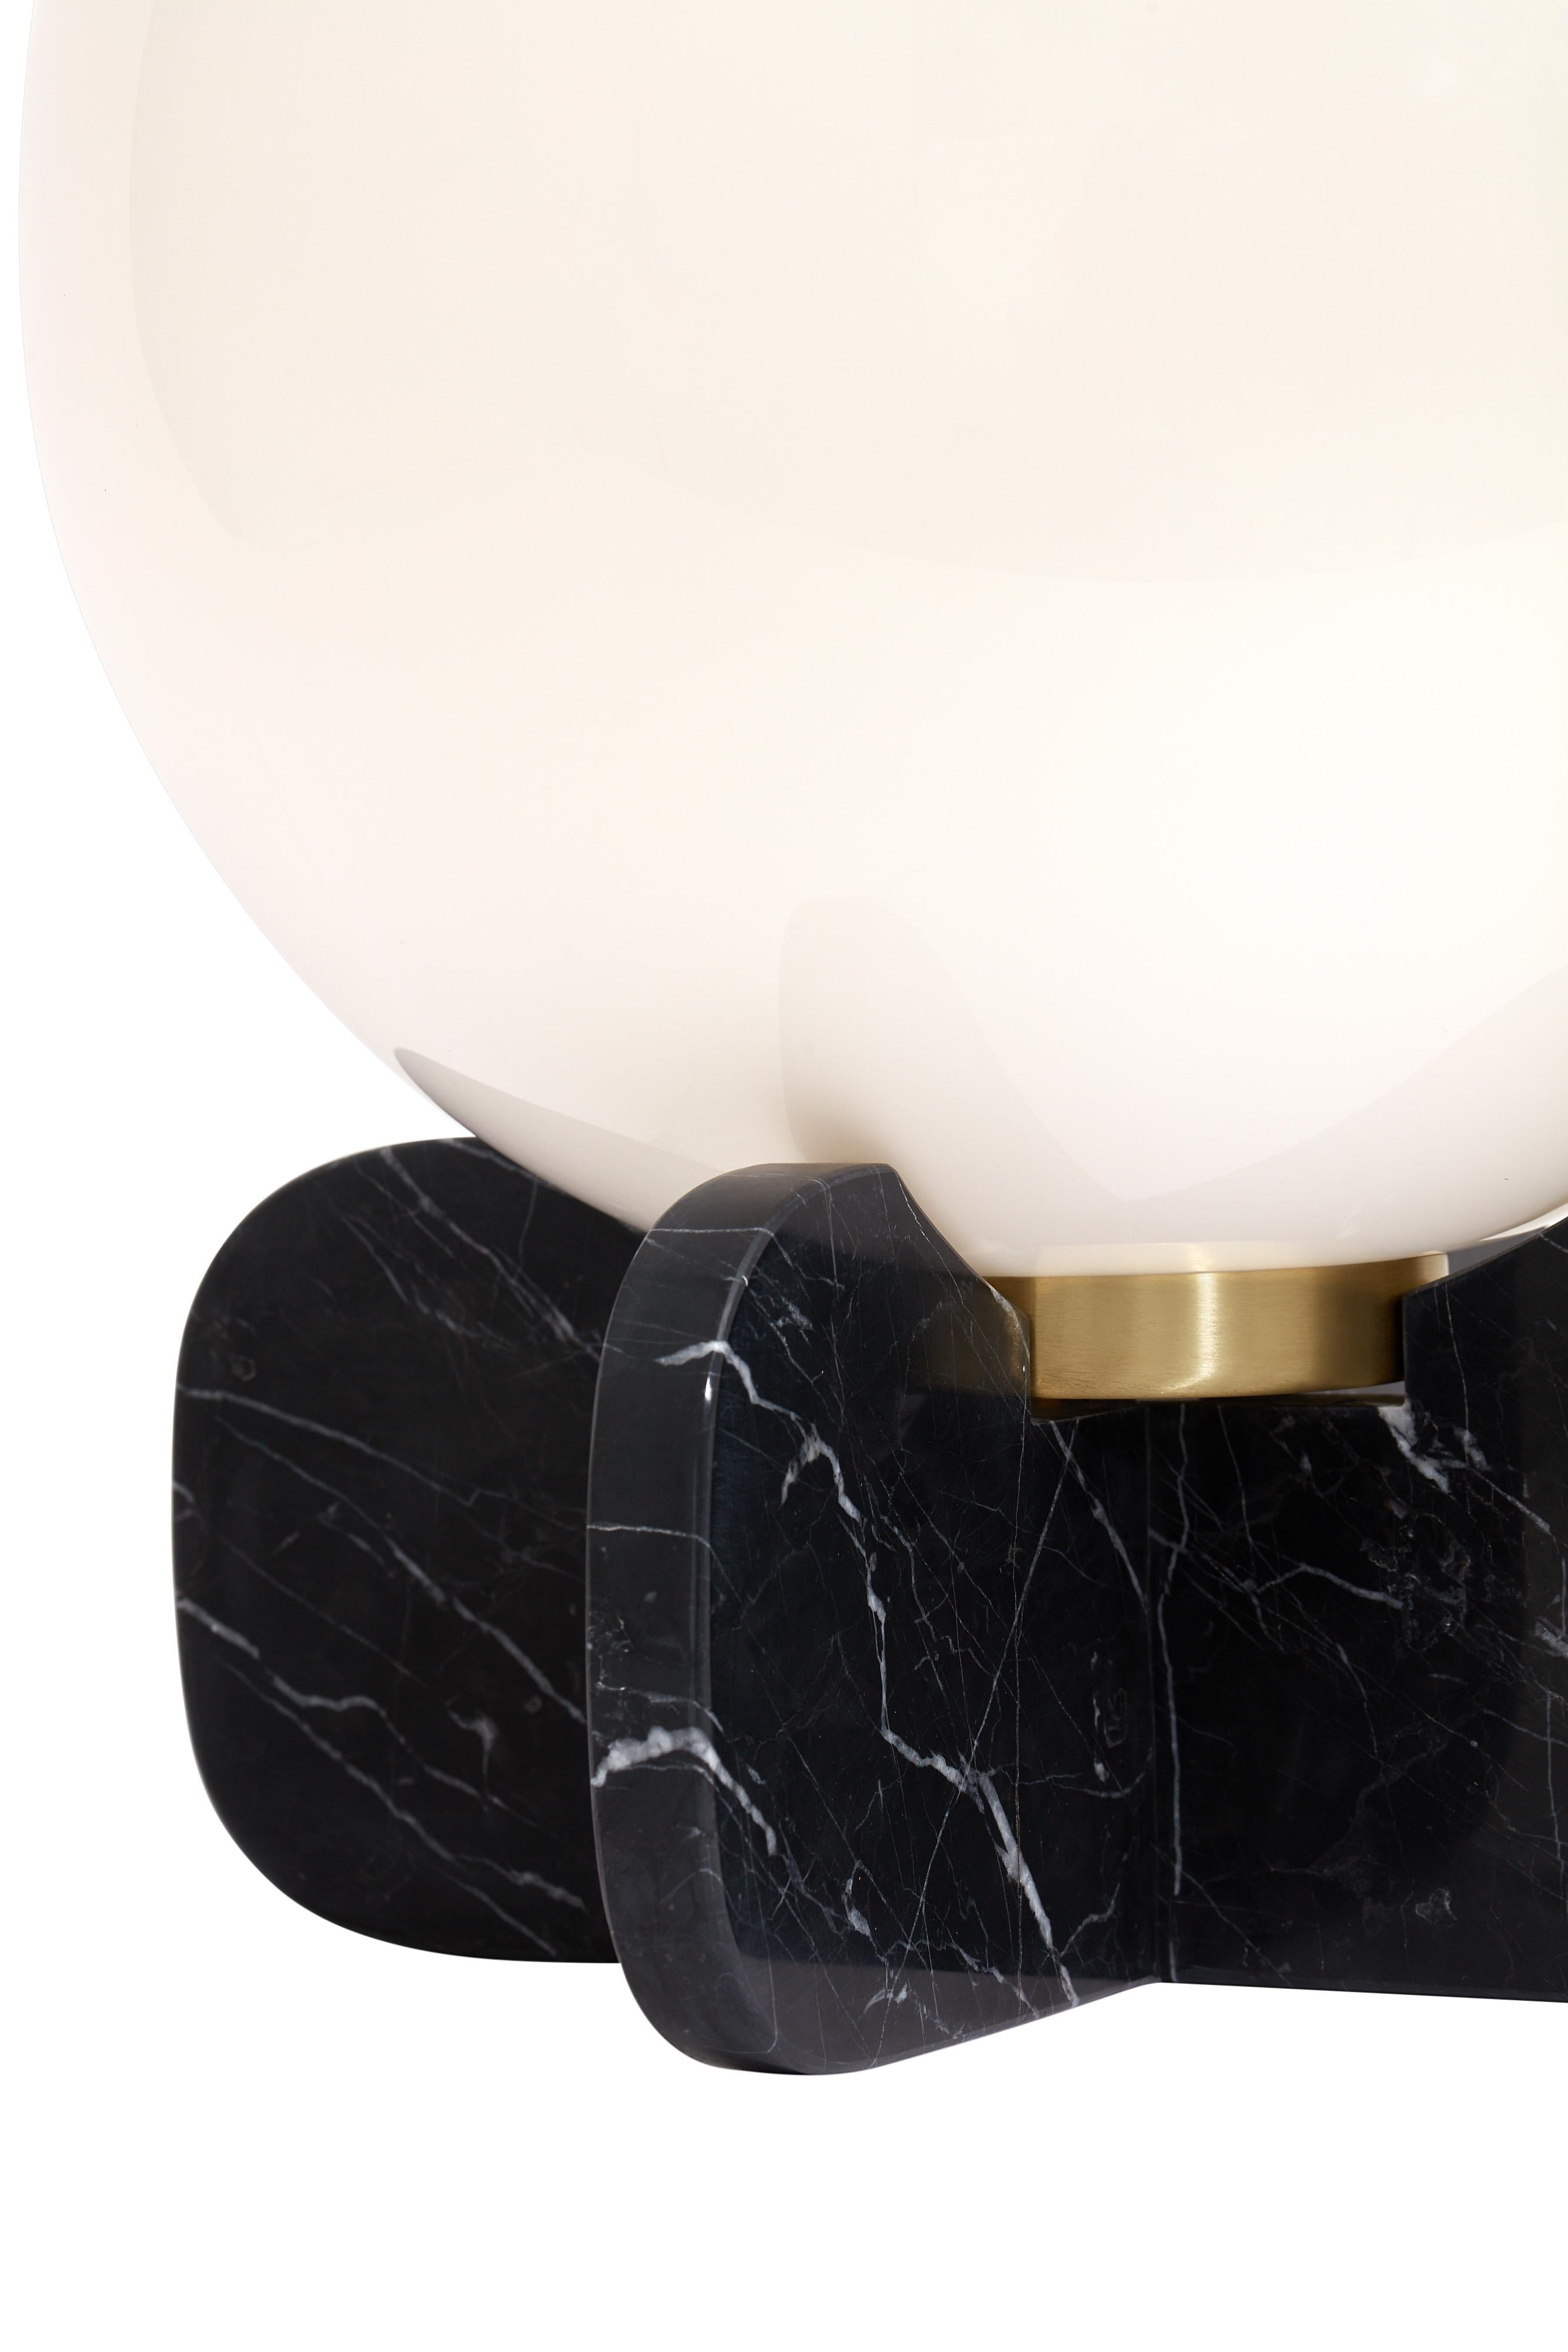 Brass Chelsea Table Lamp by CTO Lighting